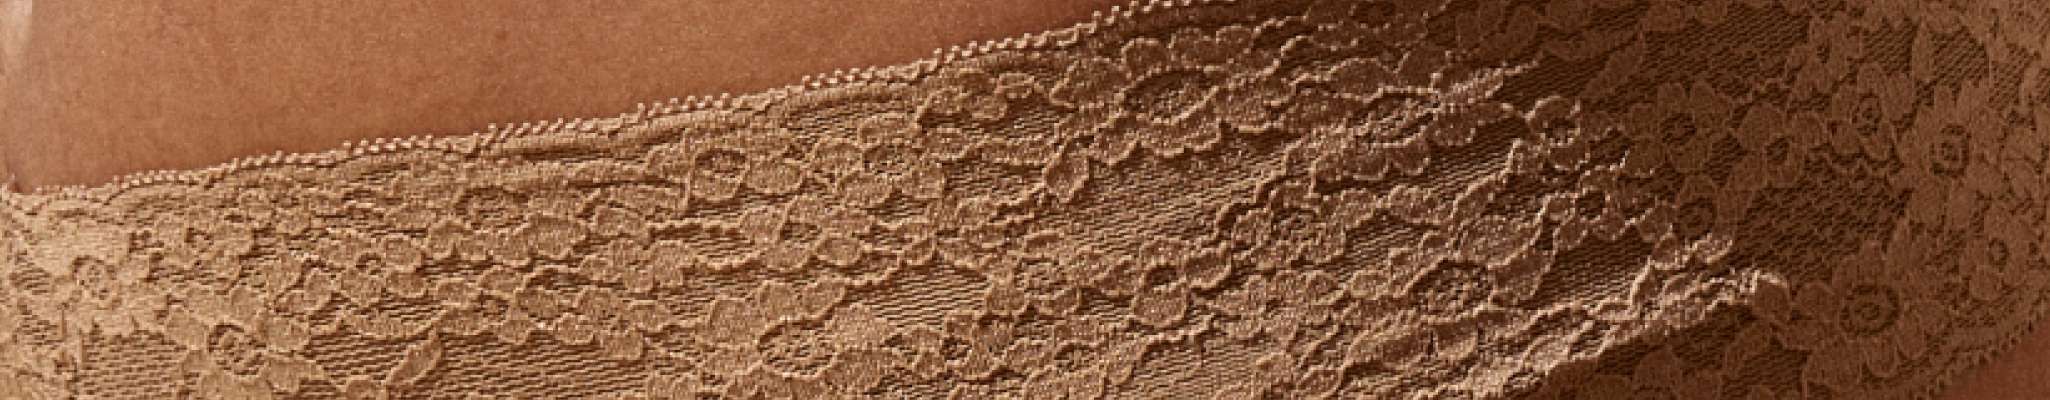 close up image of nude lace underwear fabric